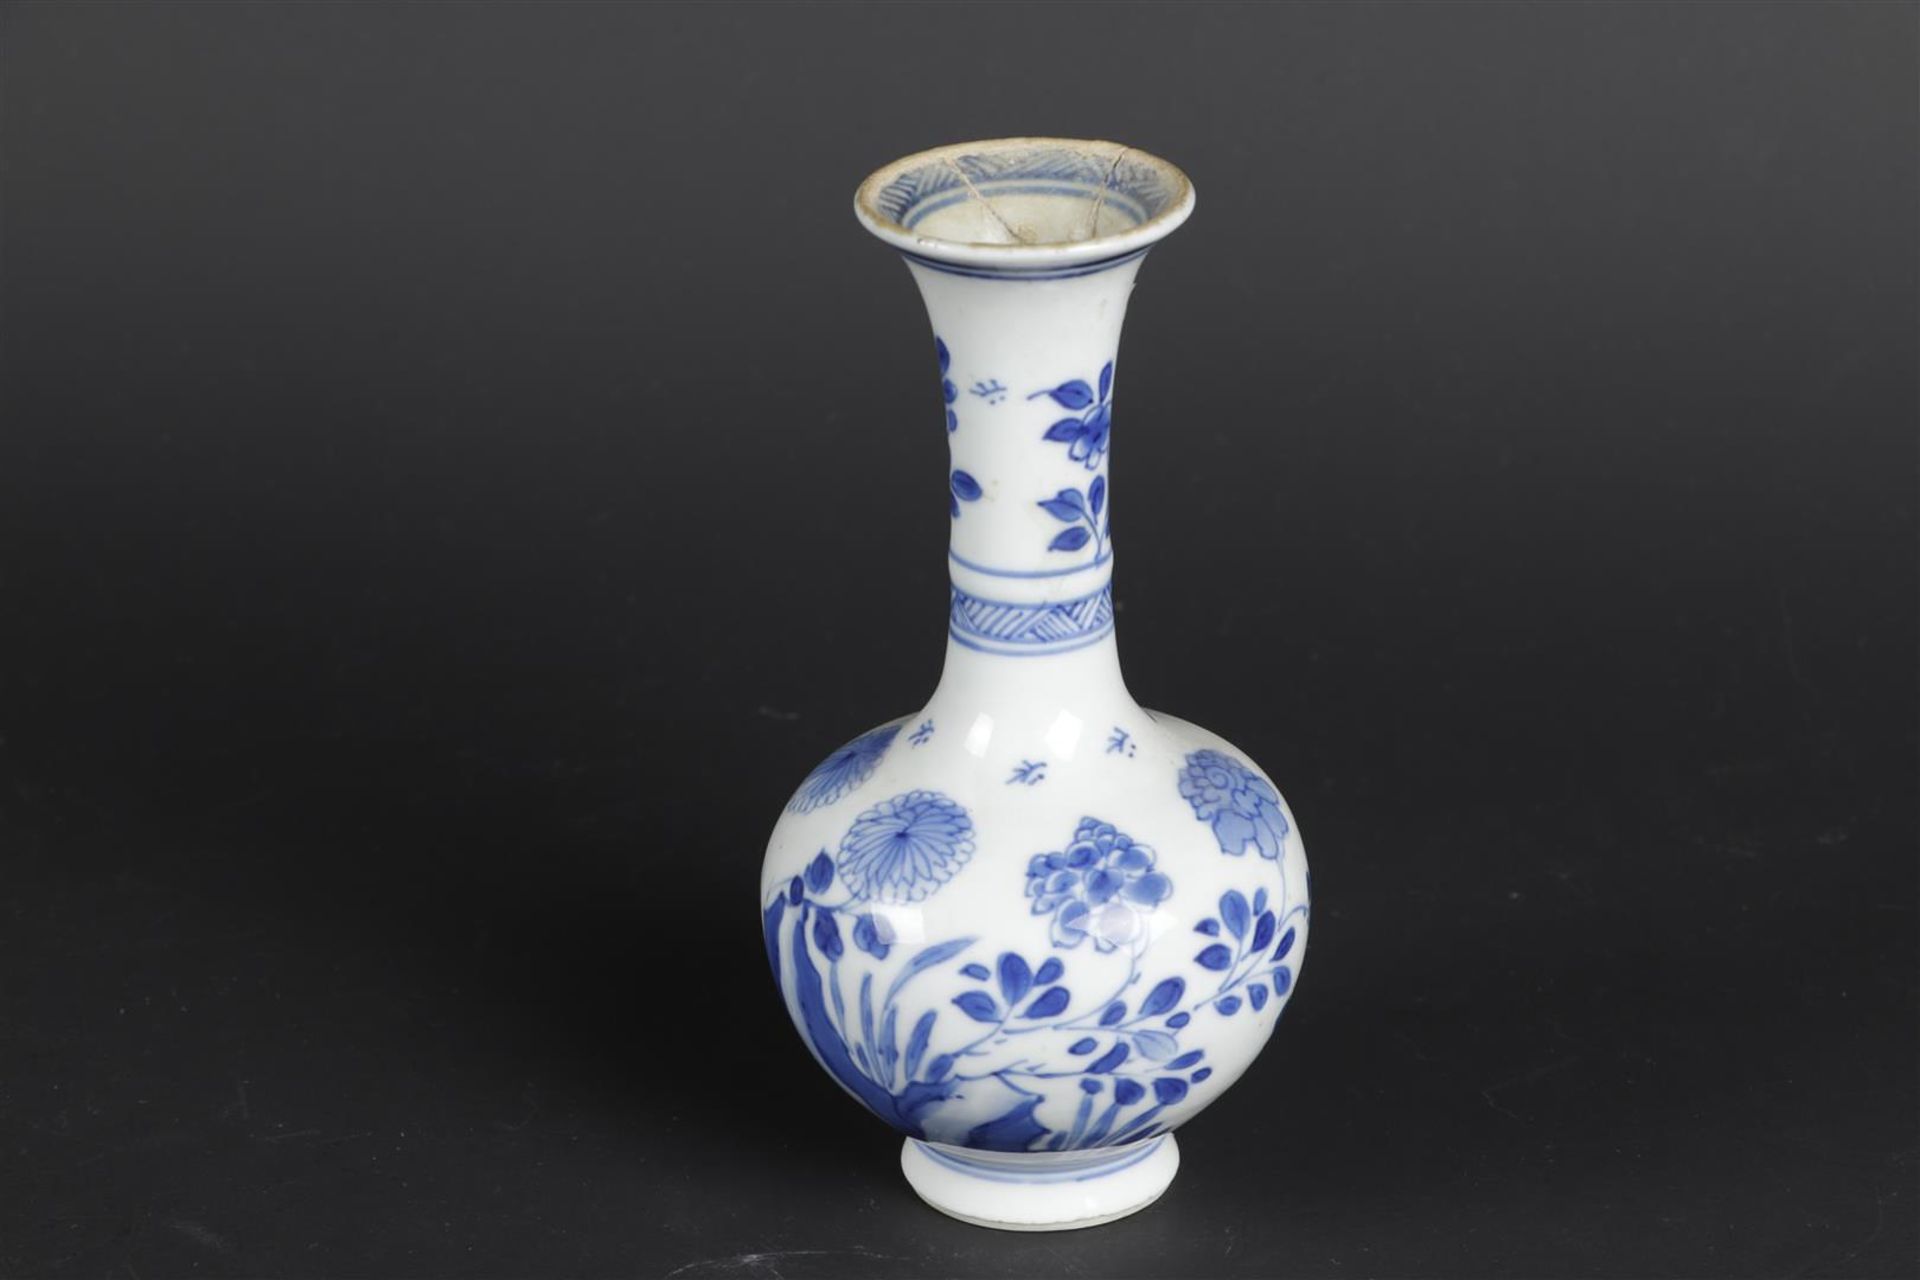 A porcelain belly vase with a slender high neck with floral decor on rock. China, Kangxi.